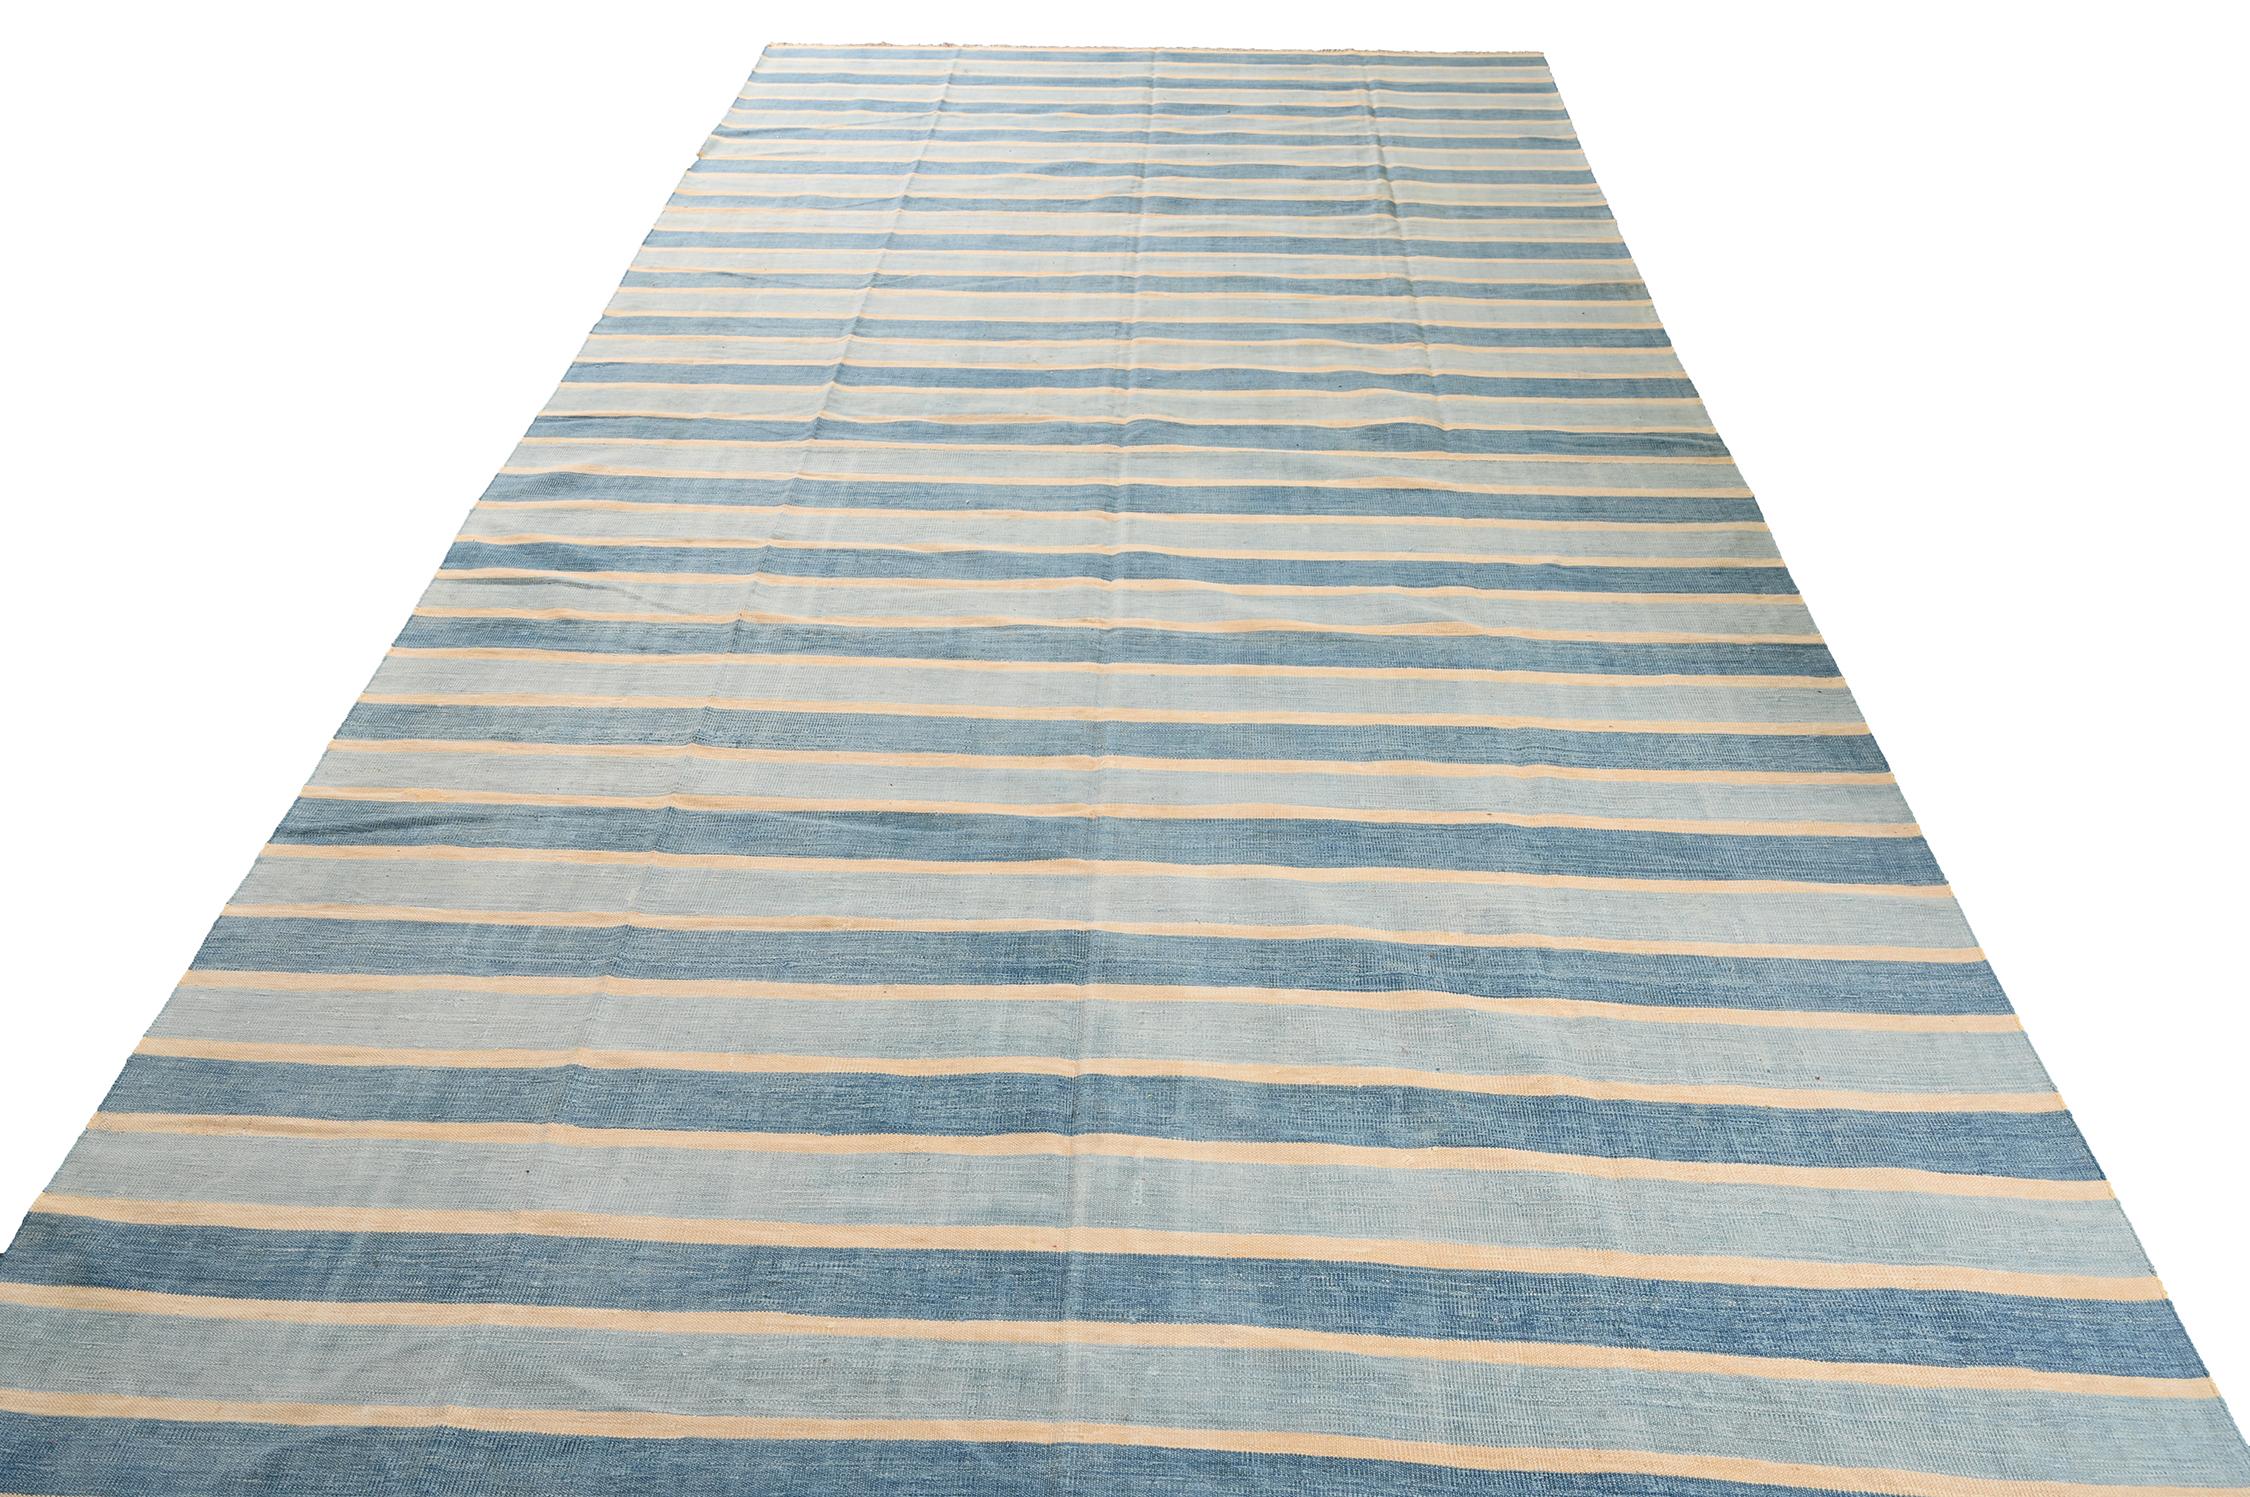 This vintage 7x14 Dhurrie is an exciting new entry in Rug & Kilim's esteemed flat weave collection. Handwoven in cotton, it originates from India circa 1950-1960. 

Further on the Design:

This flat weave prefers a simple series of stripes in